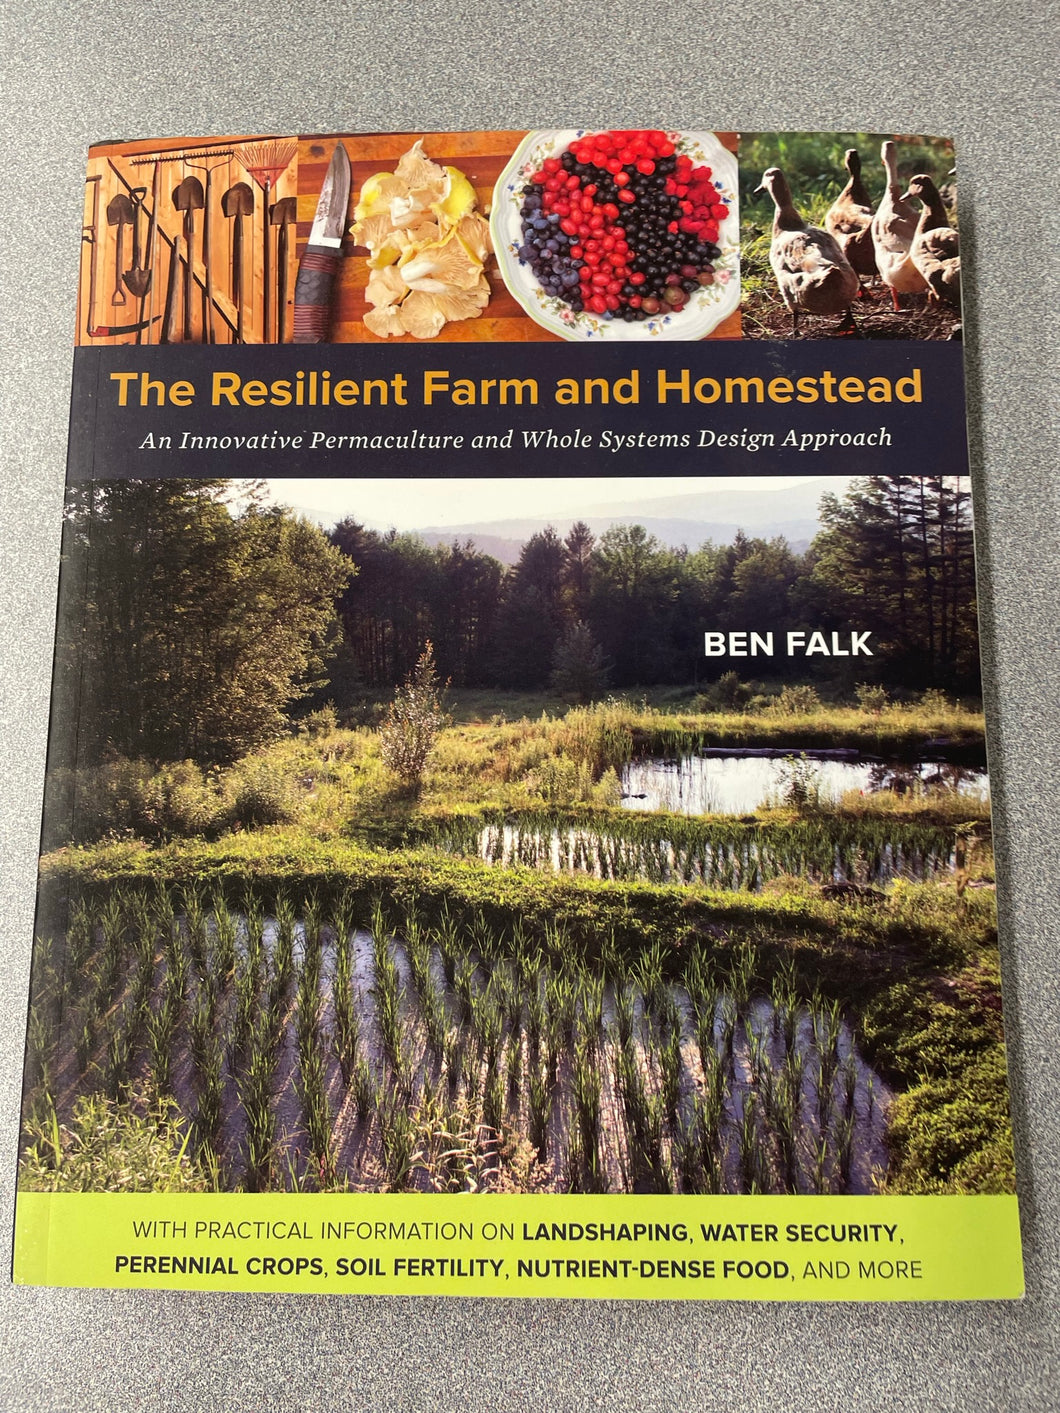 The Resilient Farm and Homestead: An Innovative Permaculture and Whole Systems Design Approach, Falk, Ben [2013] G 4/23